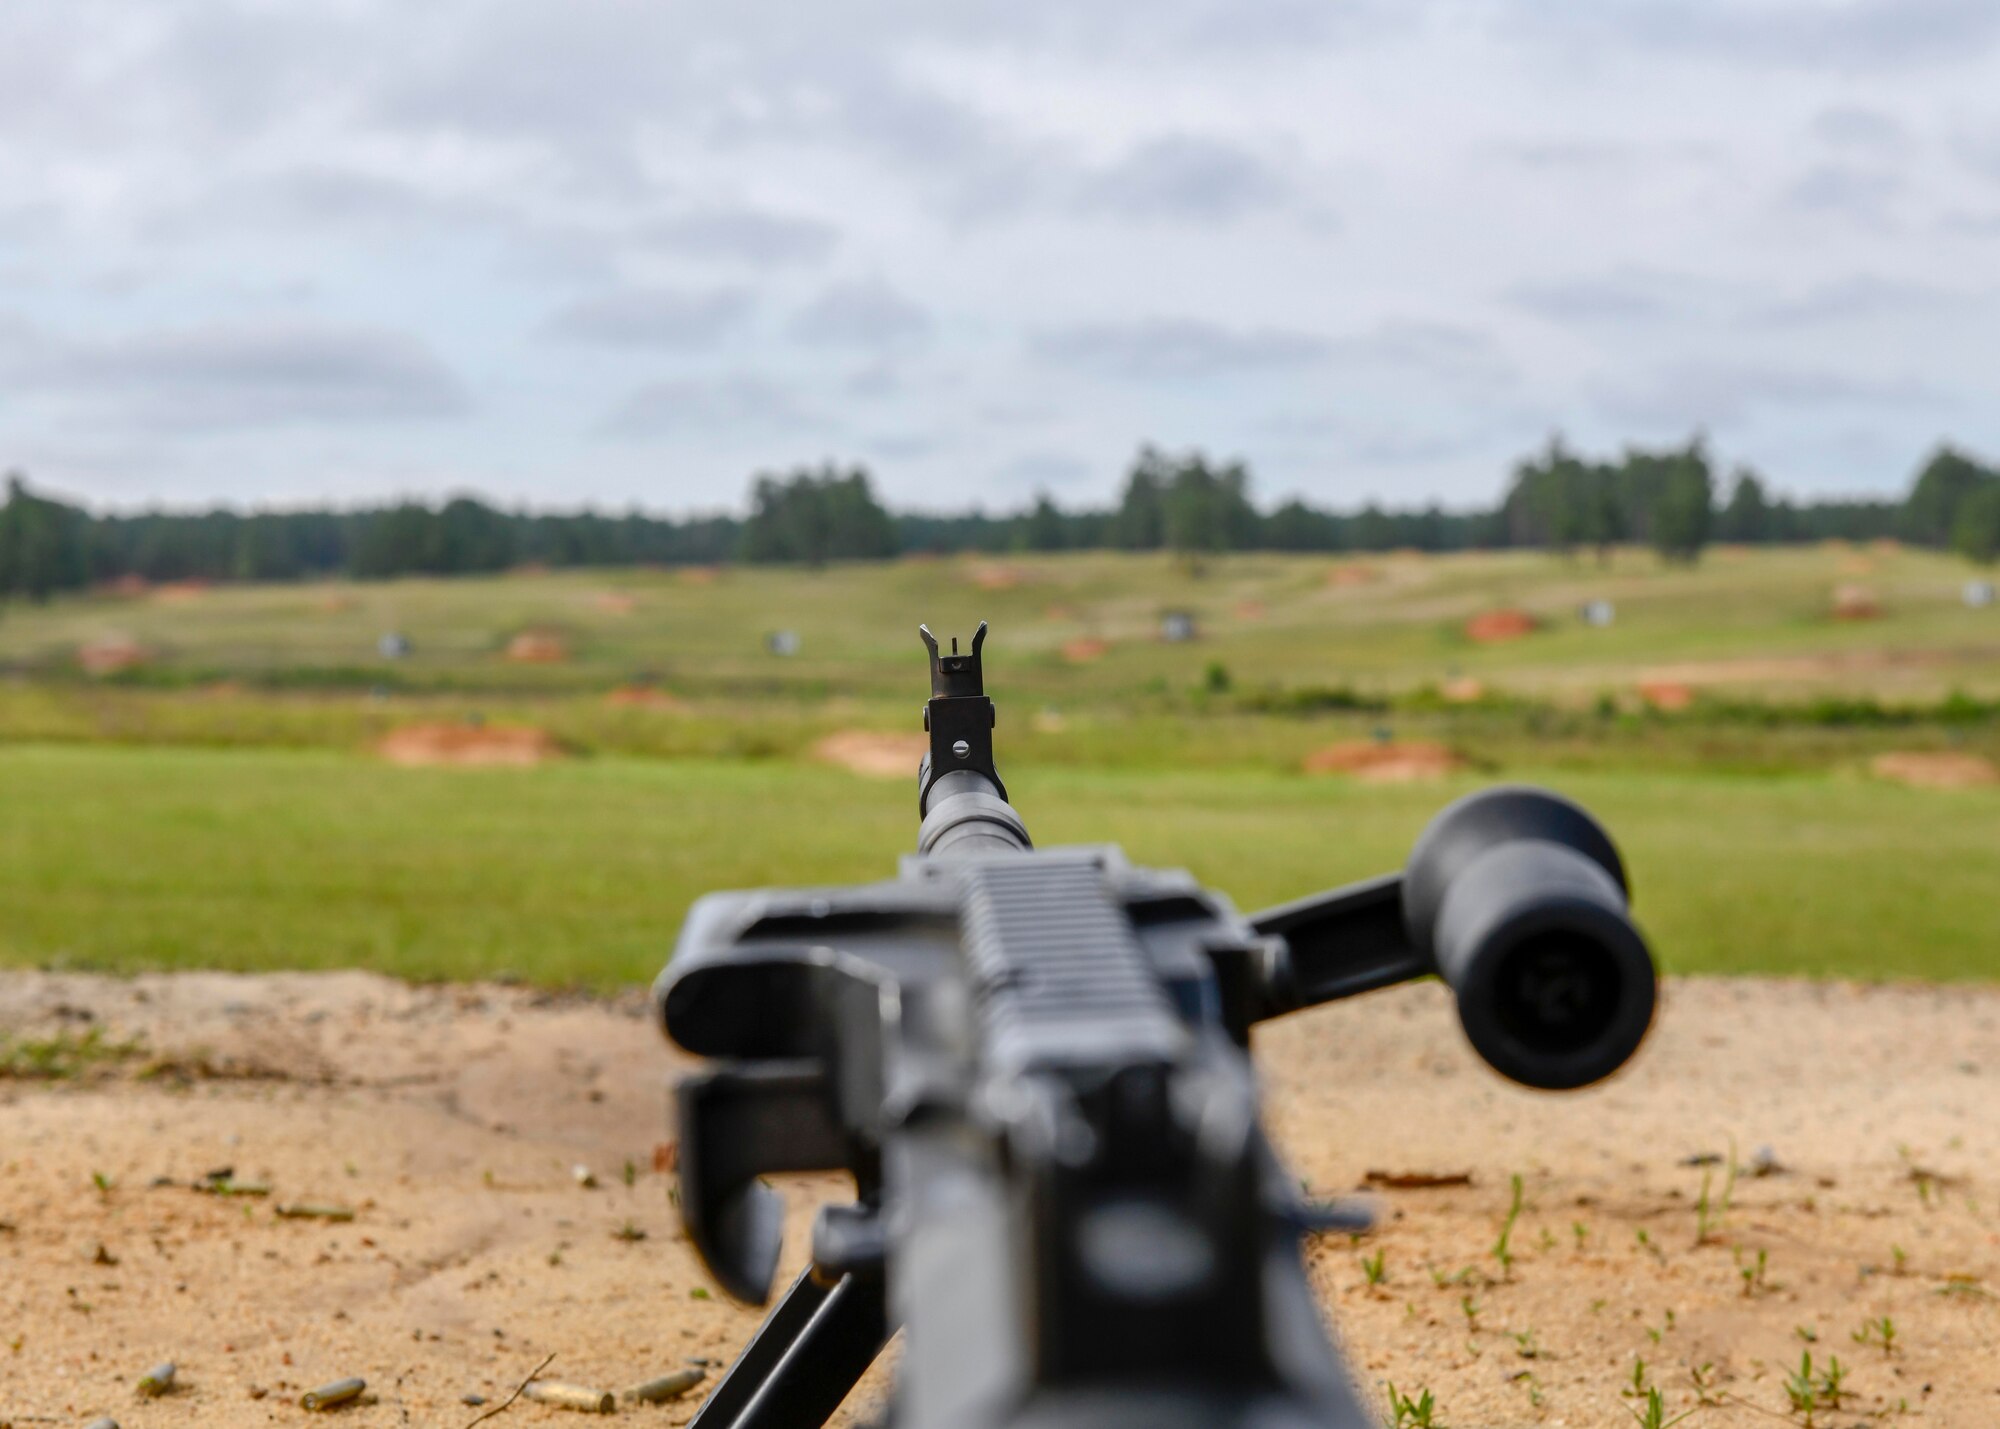 An M249 light machine gun is aimed toward a machine gun full distance range at Fort Bragg, North Carolina, May 6, 2020. The M249 engages point targets out to 800 meters with a maximum rate of fire of 850 rounds per minute. (U.S. Air Force photo by Airman First Class Kimberly Barrera)